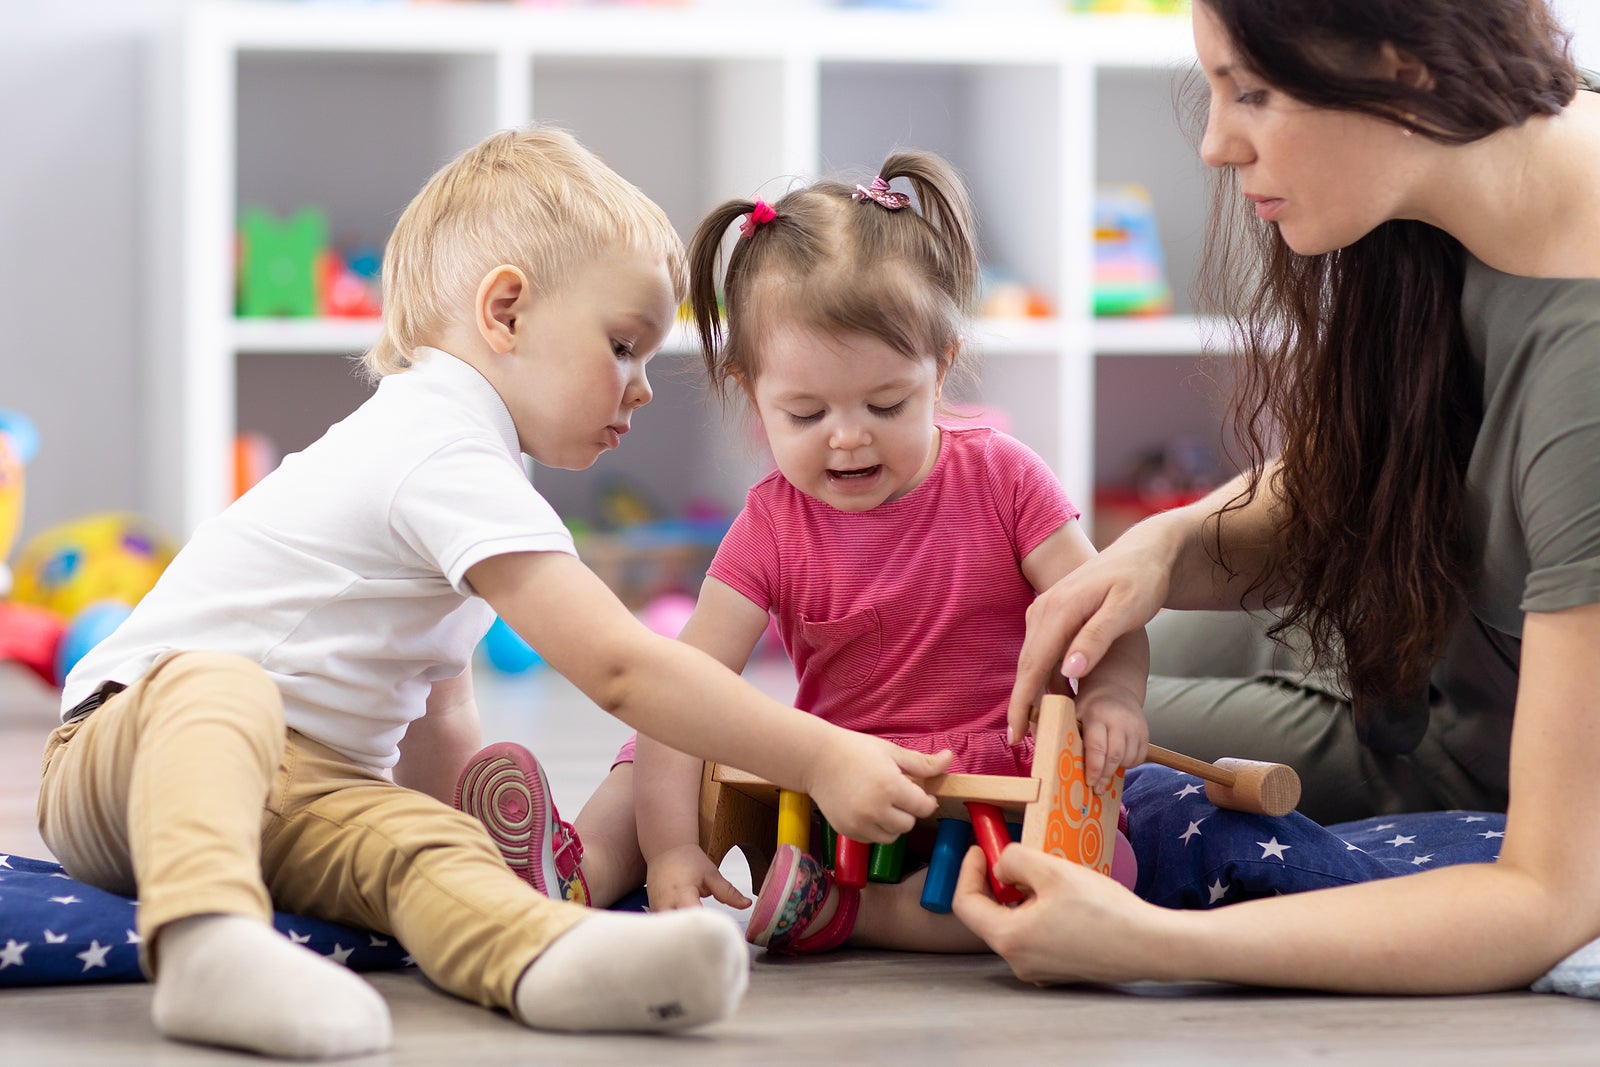 Preschooler children playing with educational wooden toys at kindergarten or daycare center. Toddlers with teacher in nursery.